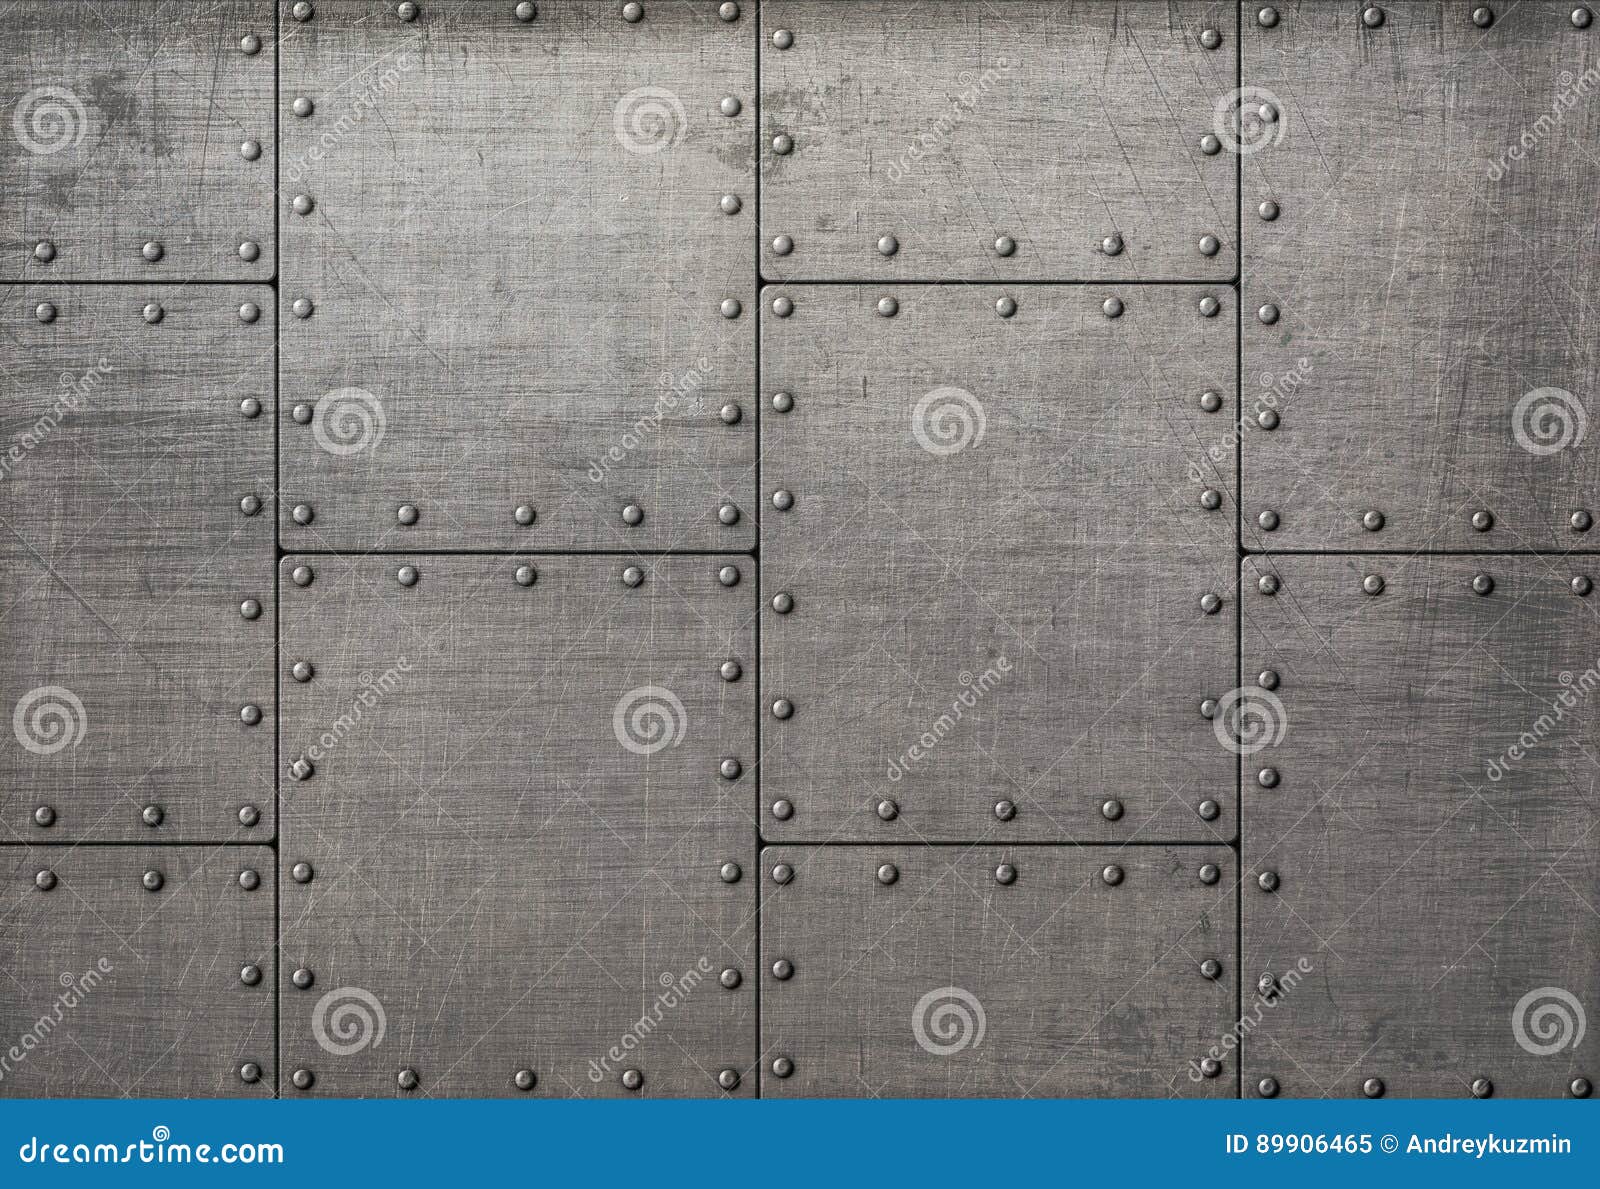 dark metal plates with rivets background or texture